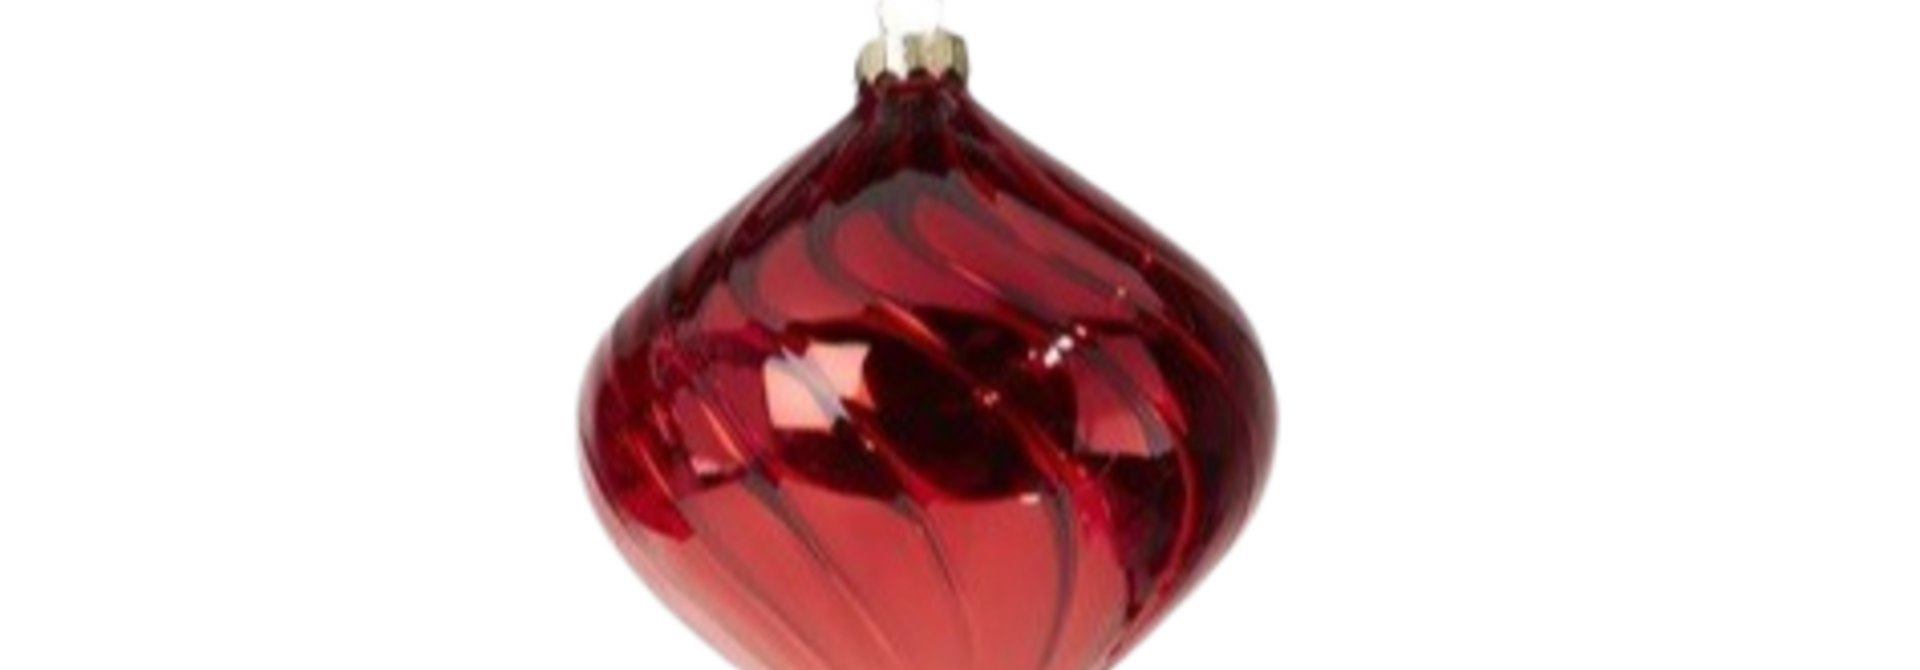 Swirl Onion | The Holiday Ornament Collection, Red - 4 Inch x 4 Inch x 4 Inch